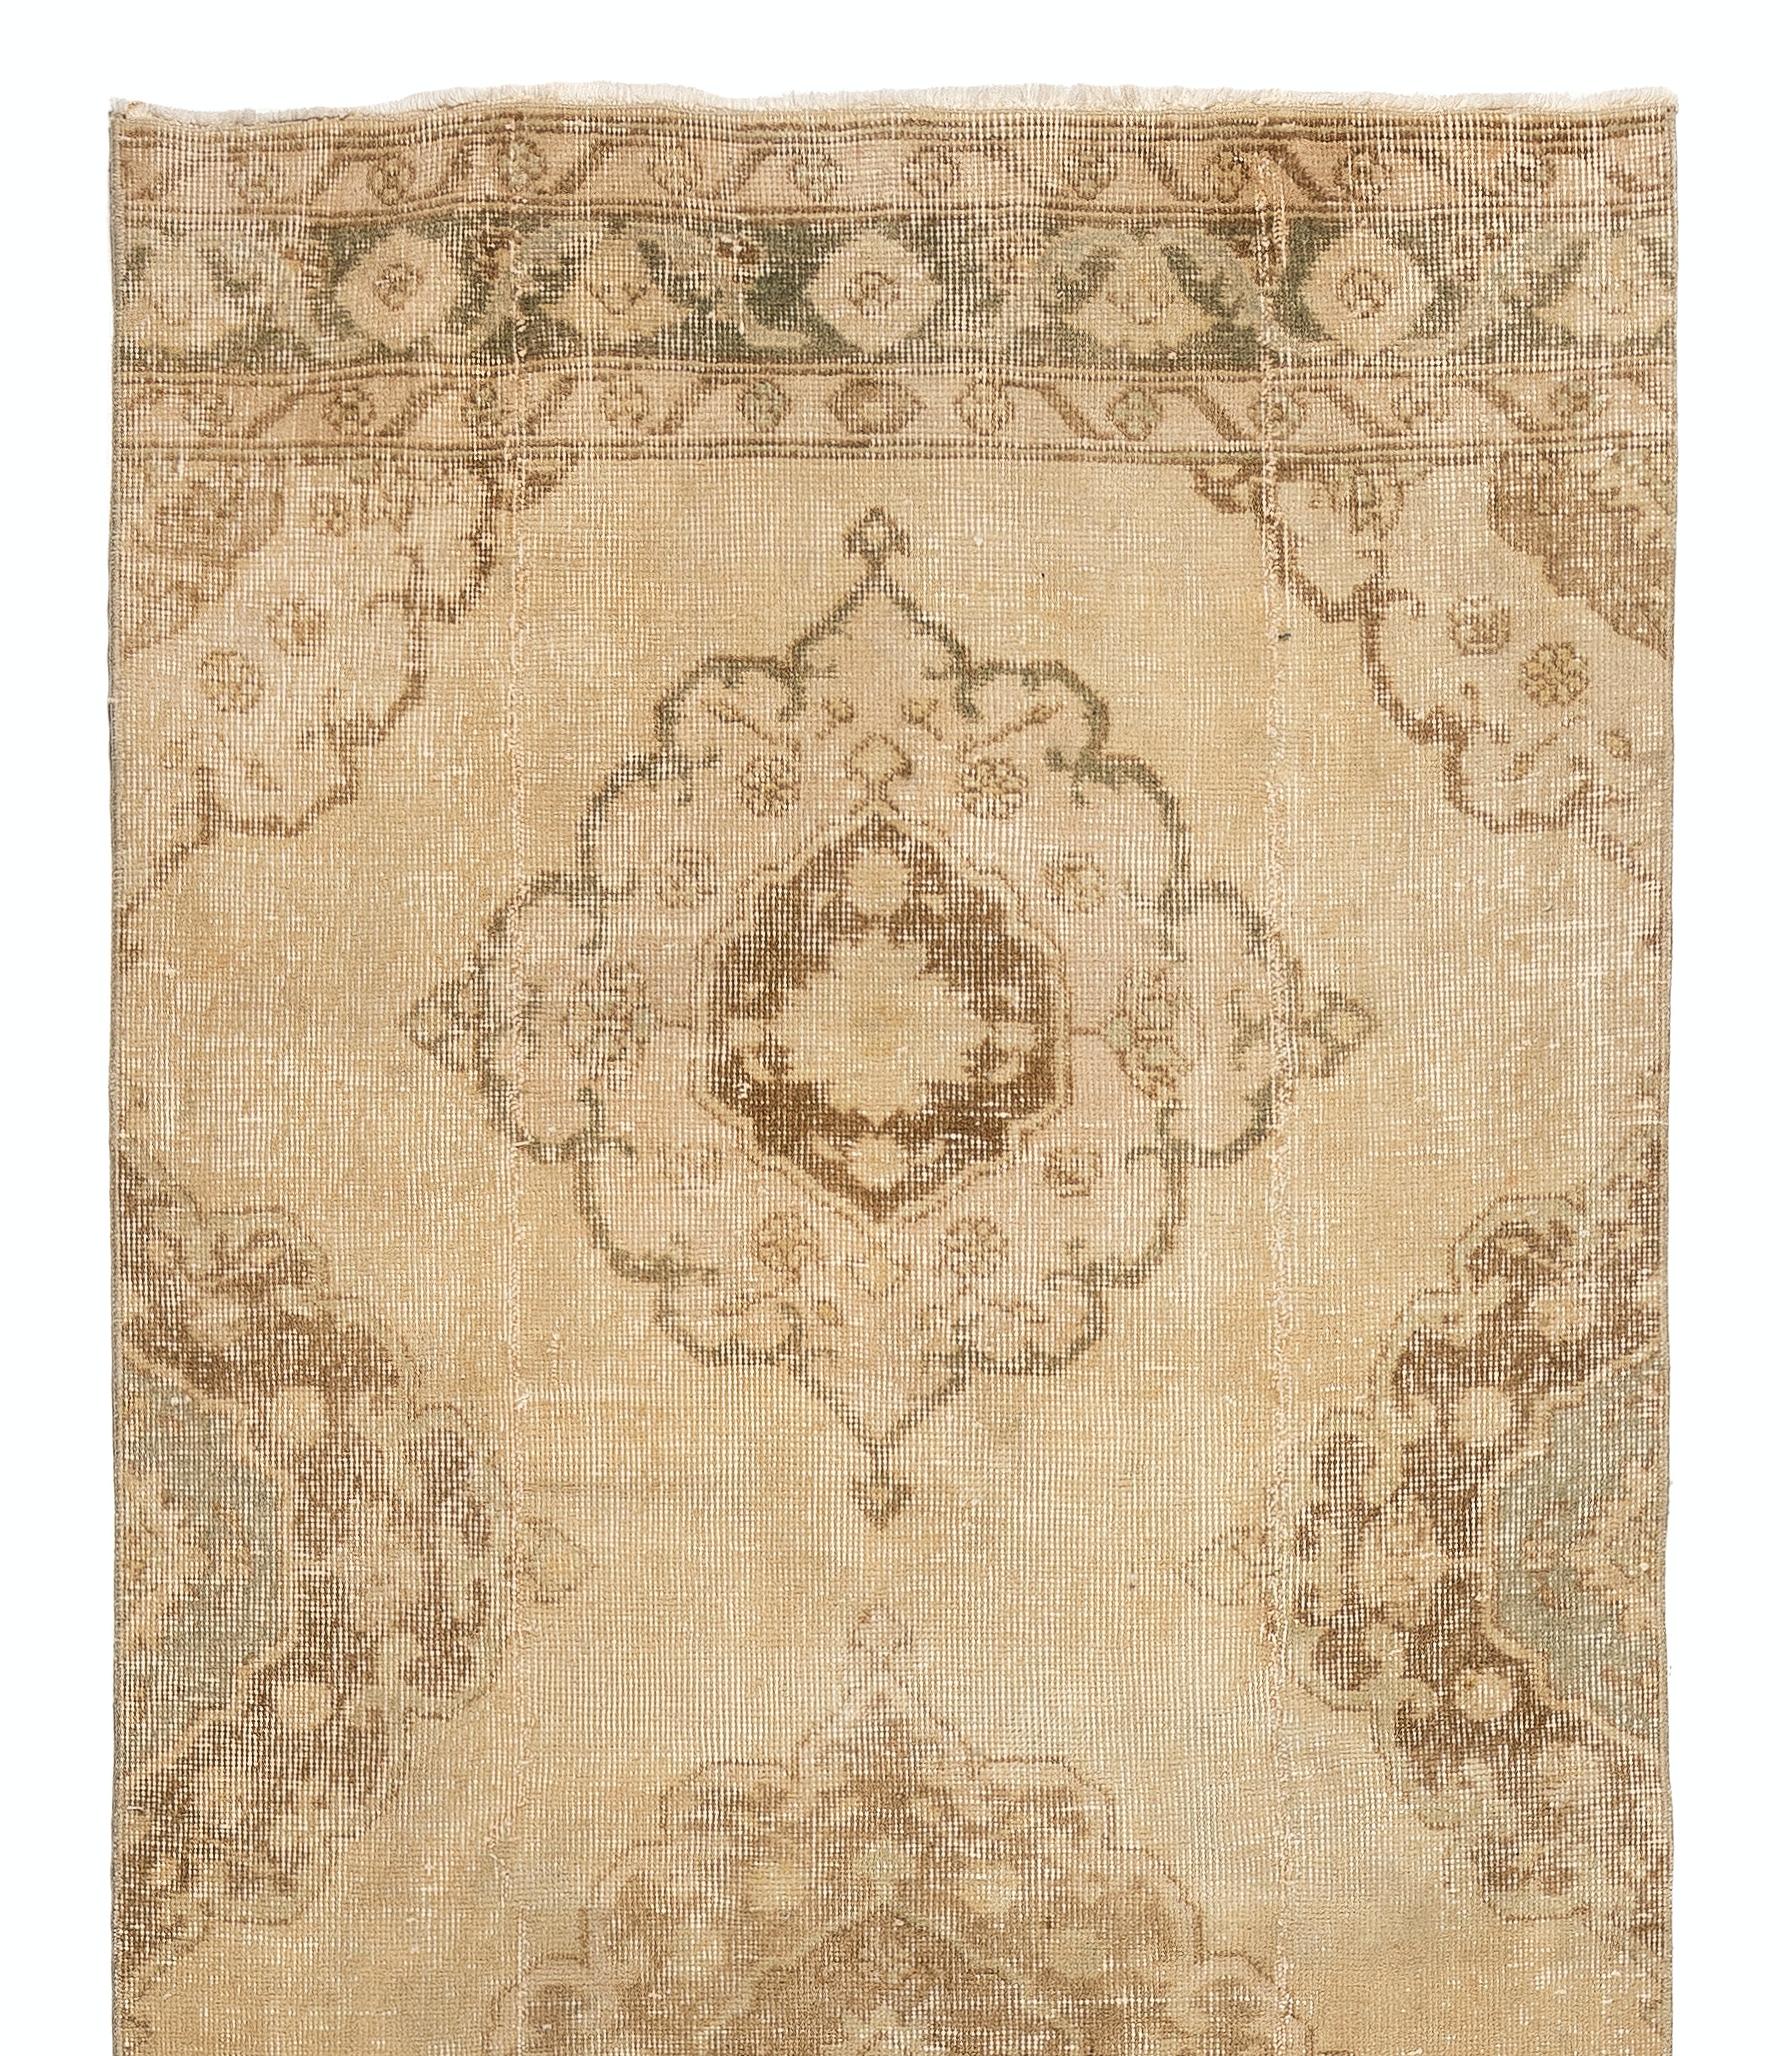 A vintage Turkish runner rug featuring multiple curvilinear medallions in mocha brown, fawn and grayish green colors across the length of its golden sand field and borders decorated with floral heads at its top and bottom ends. 

This runner rug was